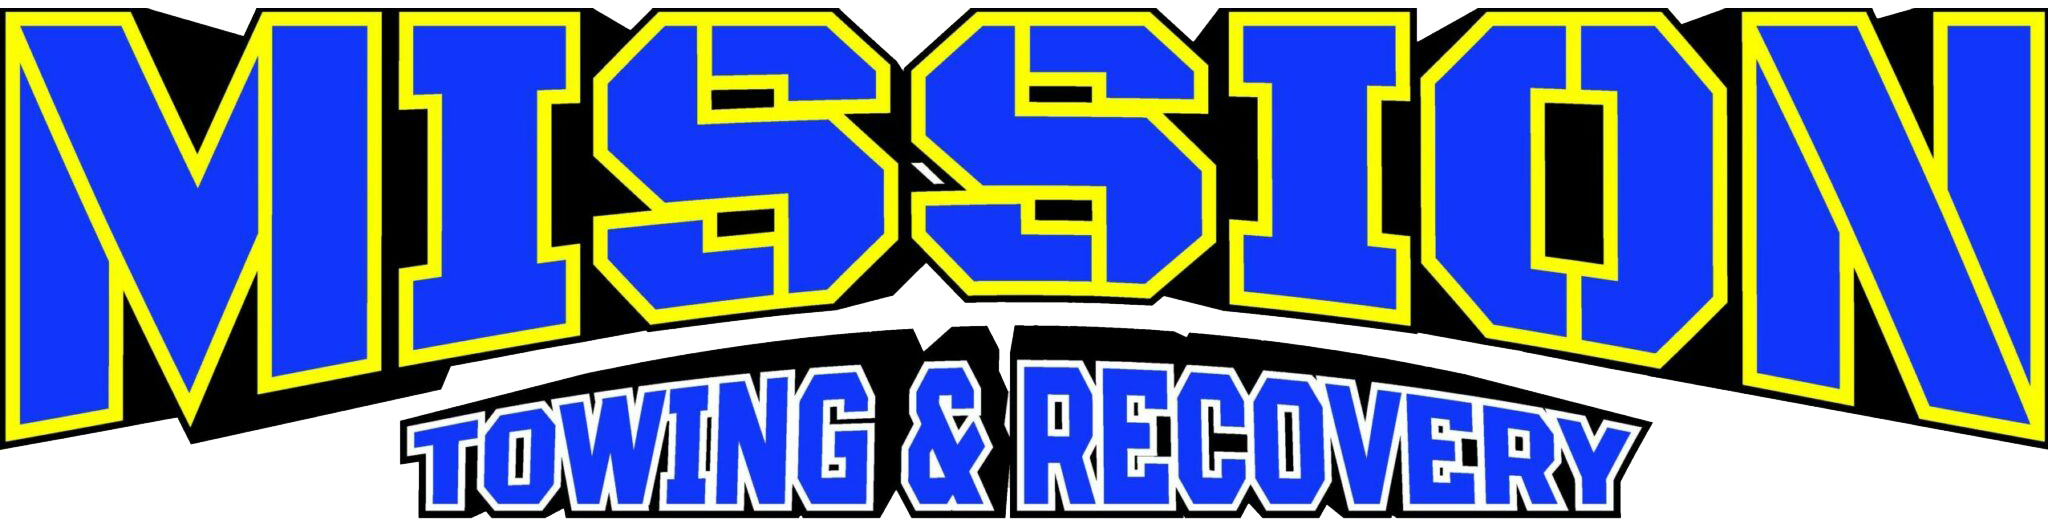 Mission Towing & Recovery Logo